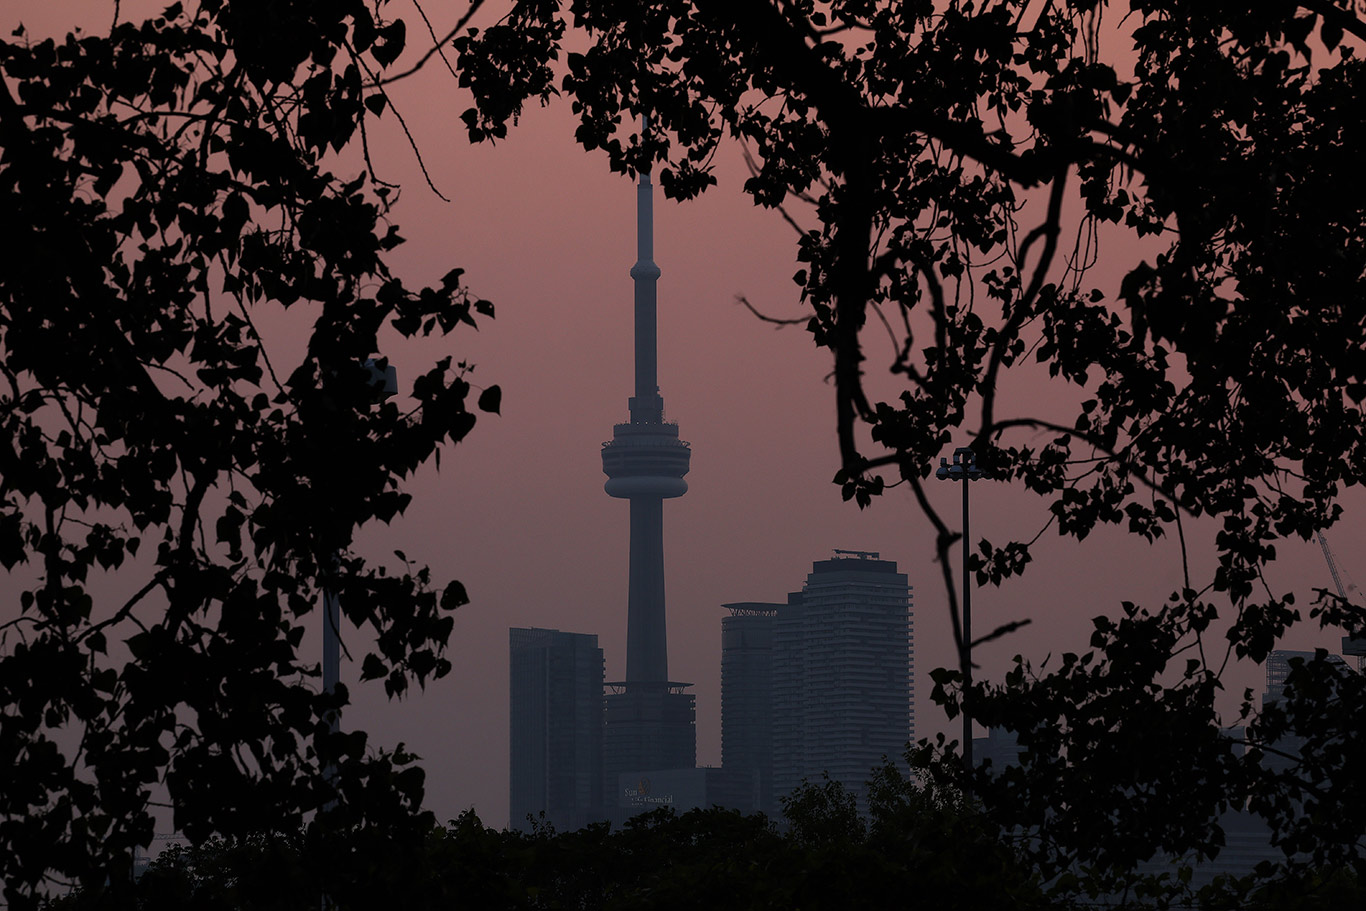 Smoke from forest fires creates a pink hazy sunset over Toronto